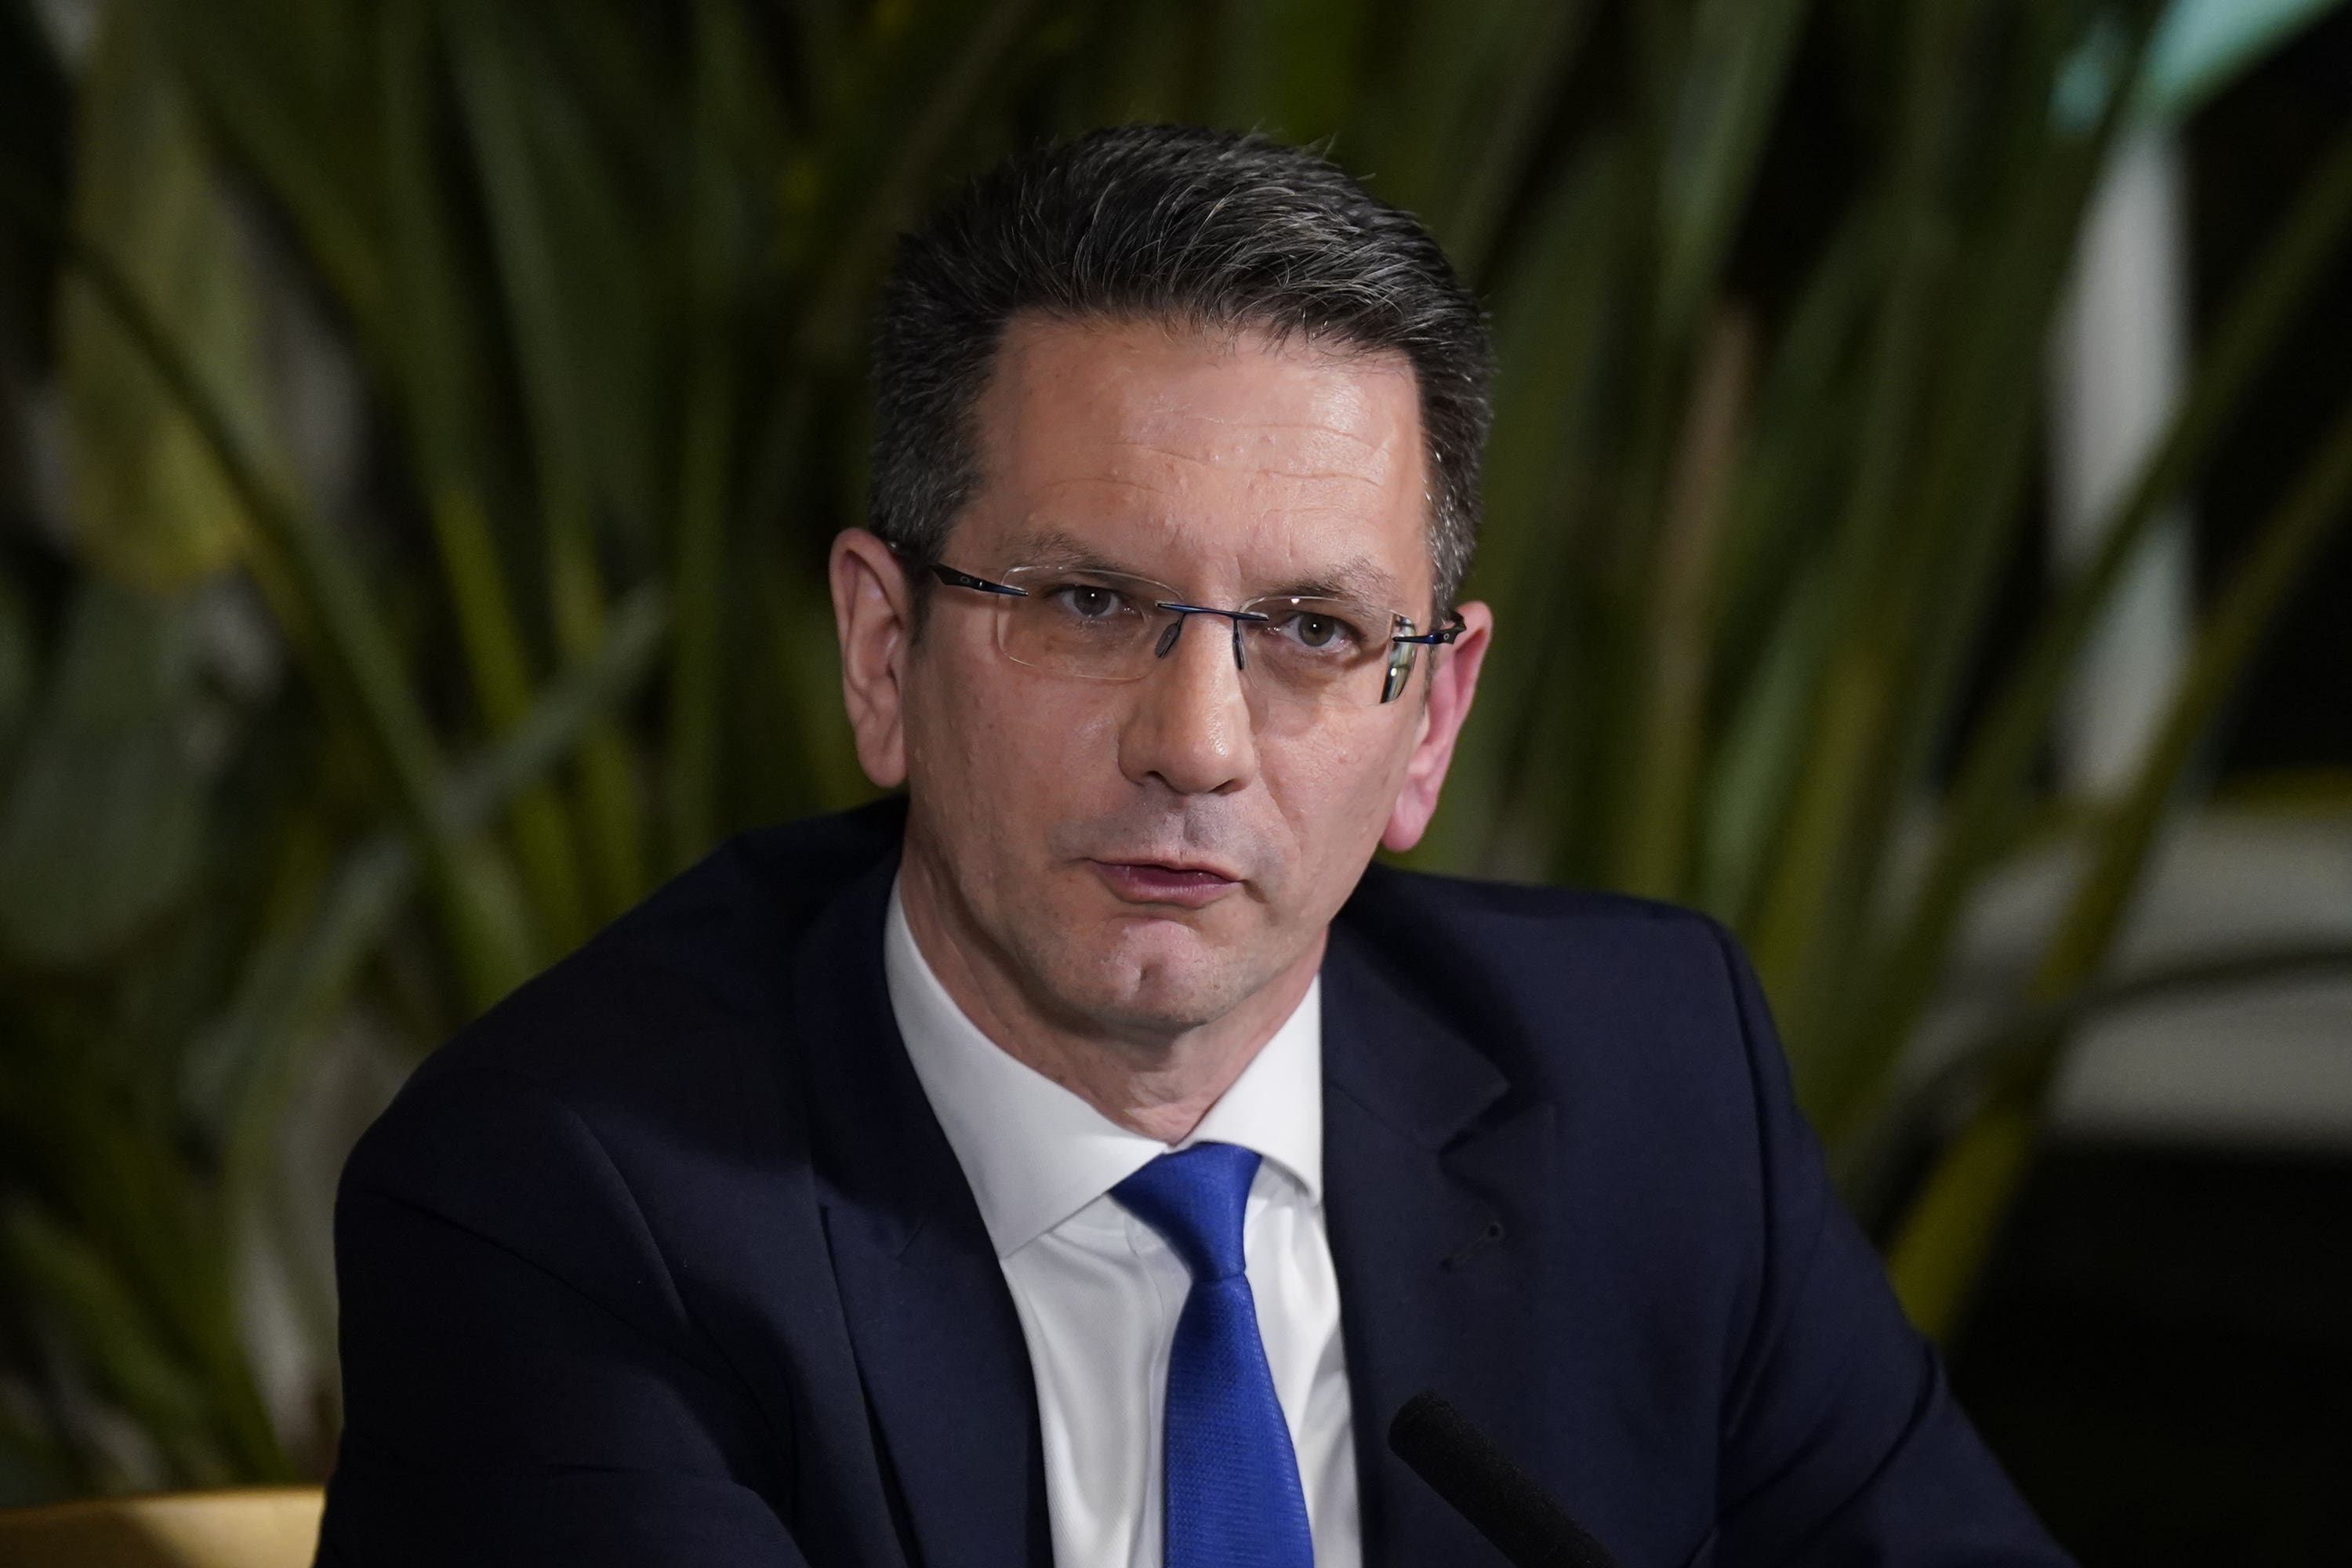 Northern Ireland minister Steve Baker has hinted at a potential bid to become the new Tory leader